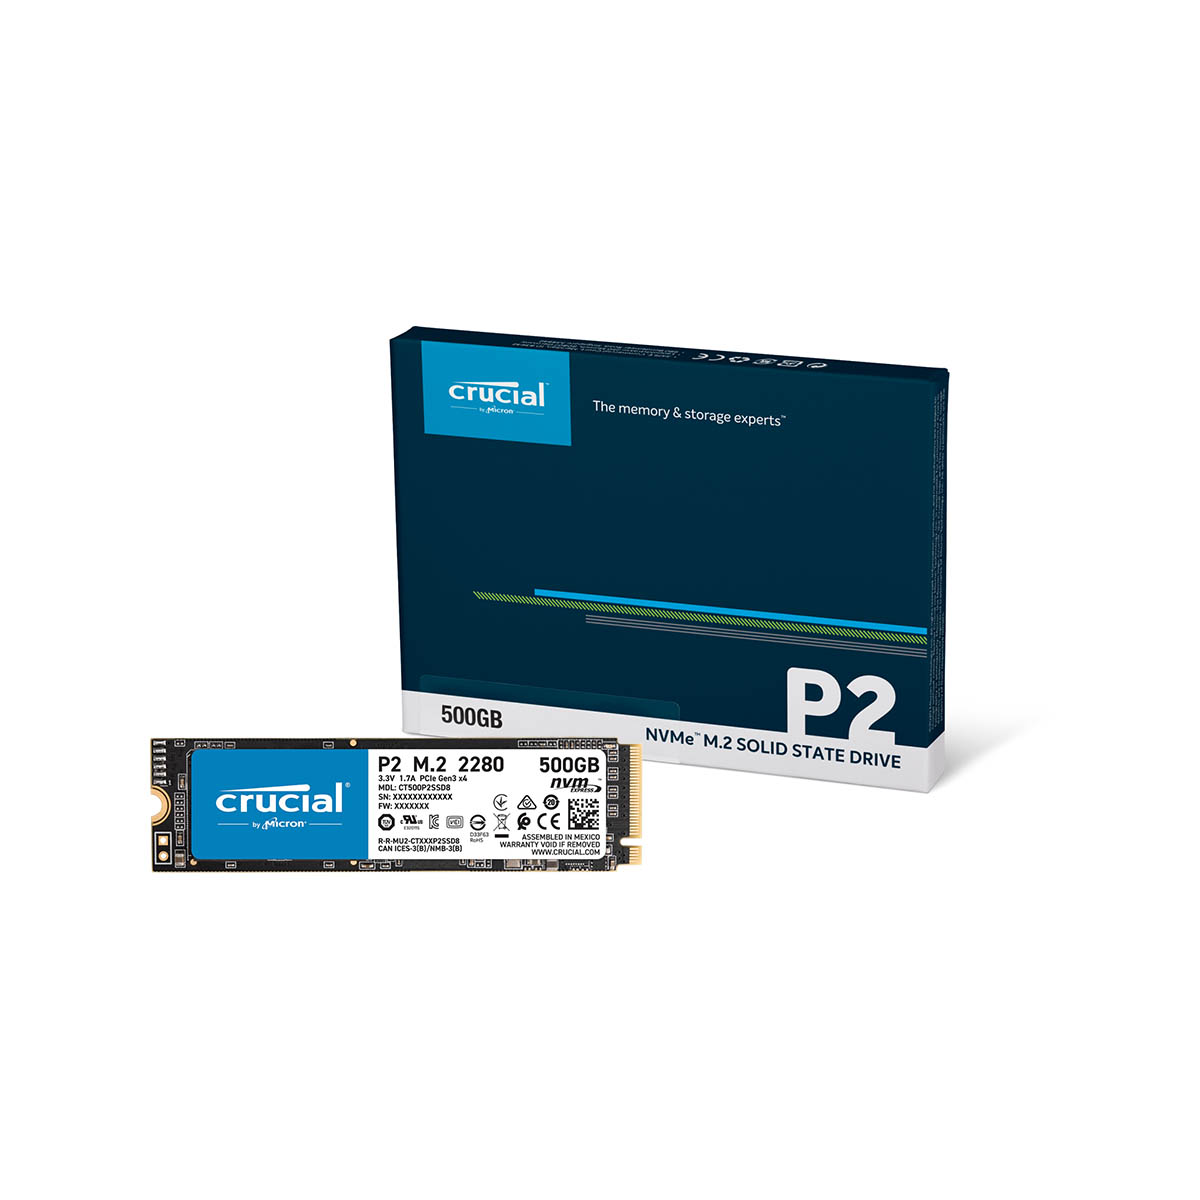 PC/タブレットcrucial P2 SSD M.2 1TB